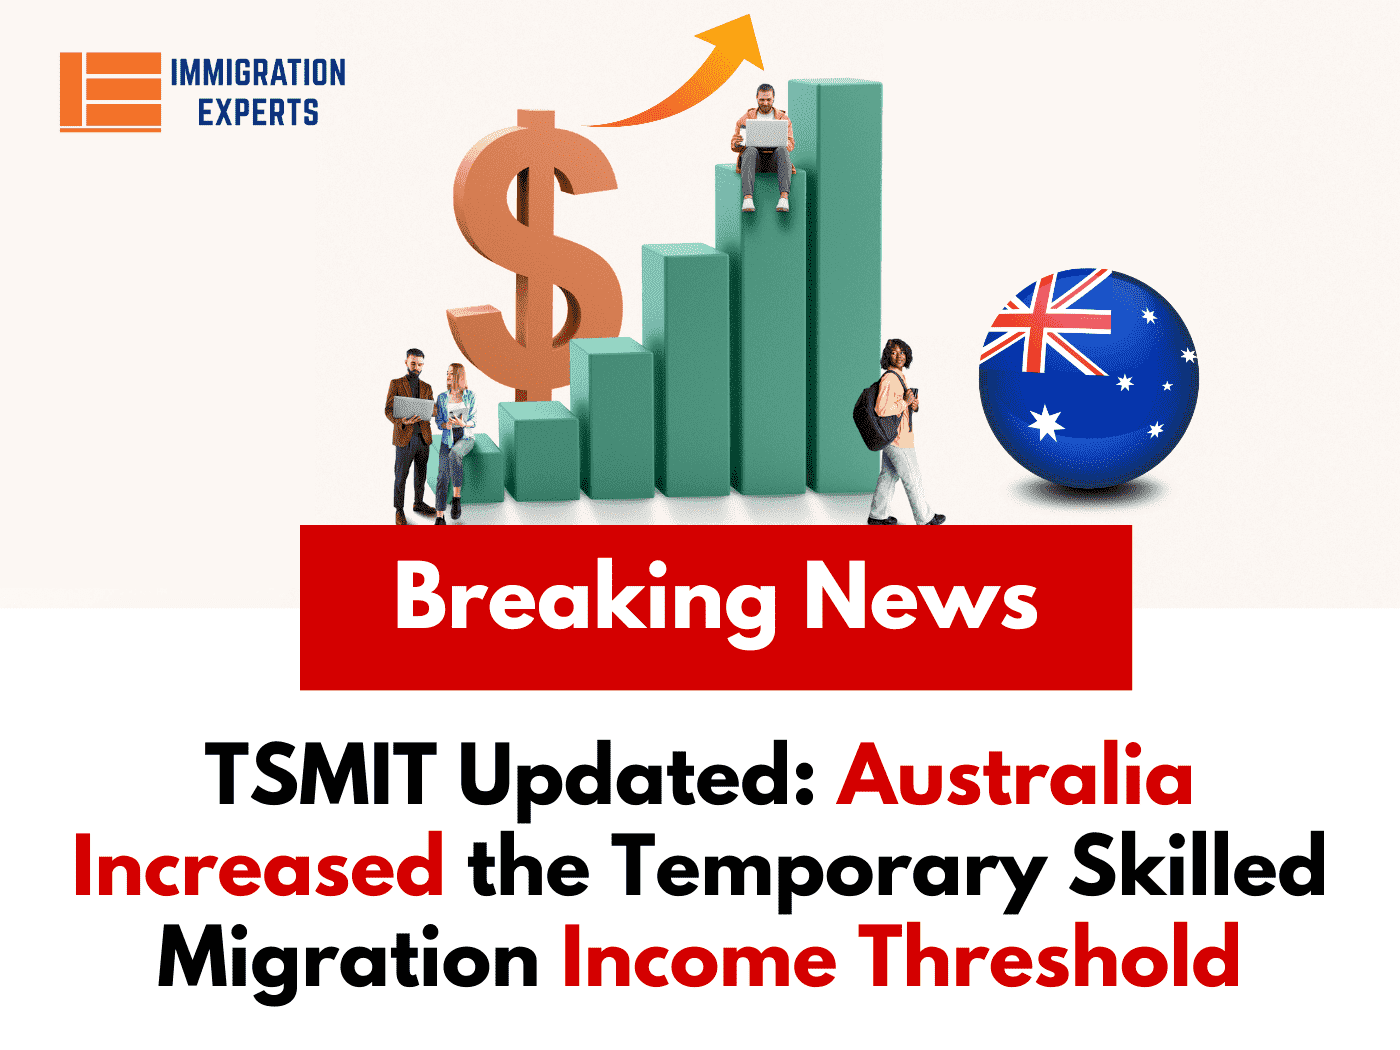 TSMIT Updated: Australia Increased the Temporary Skilled Migration Income Threshold